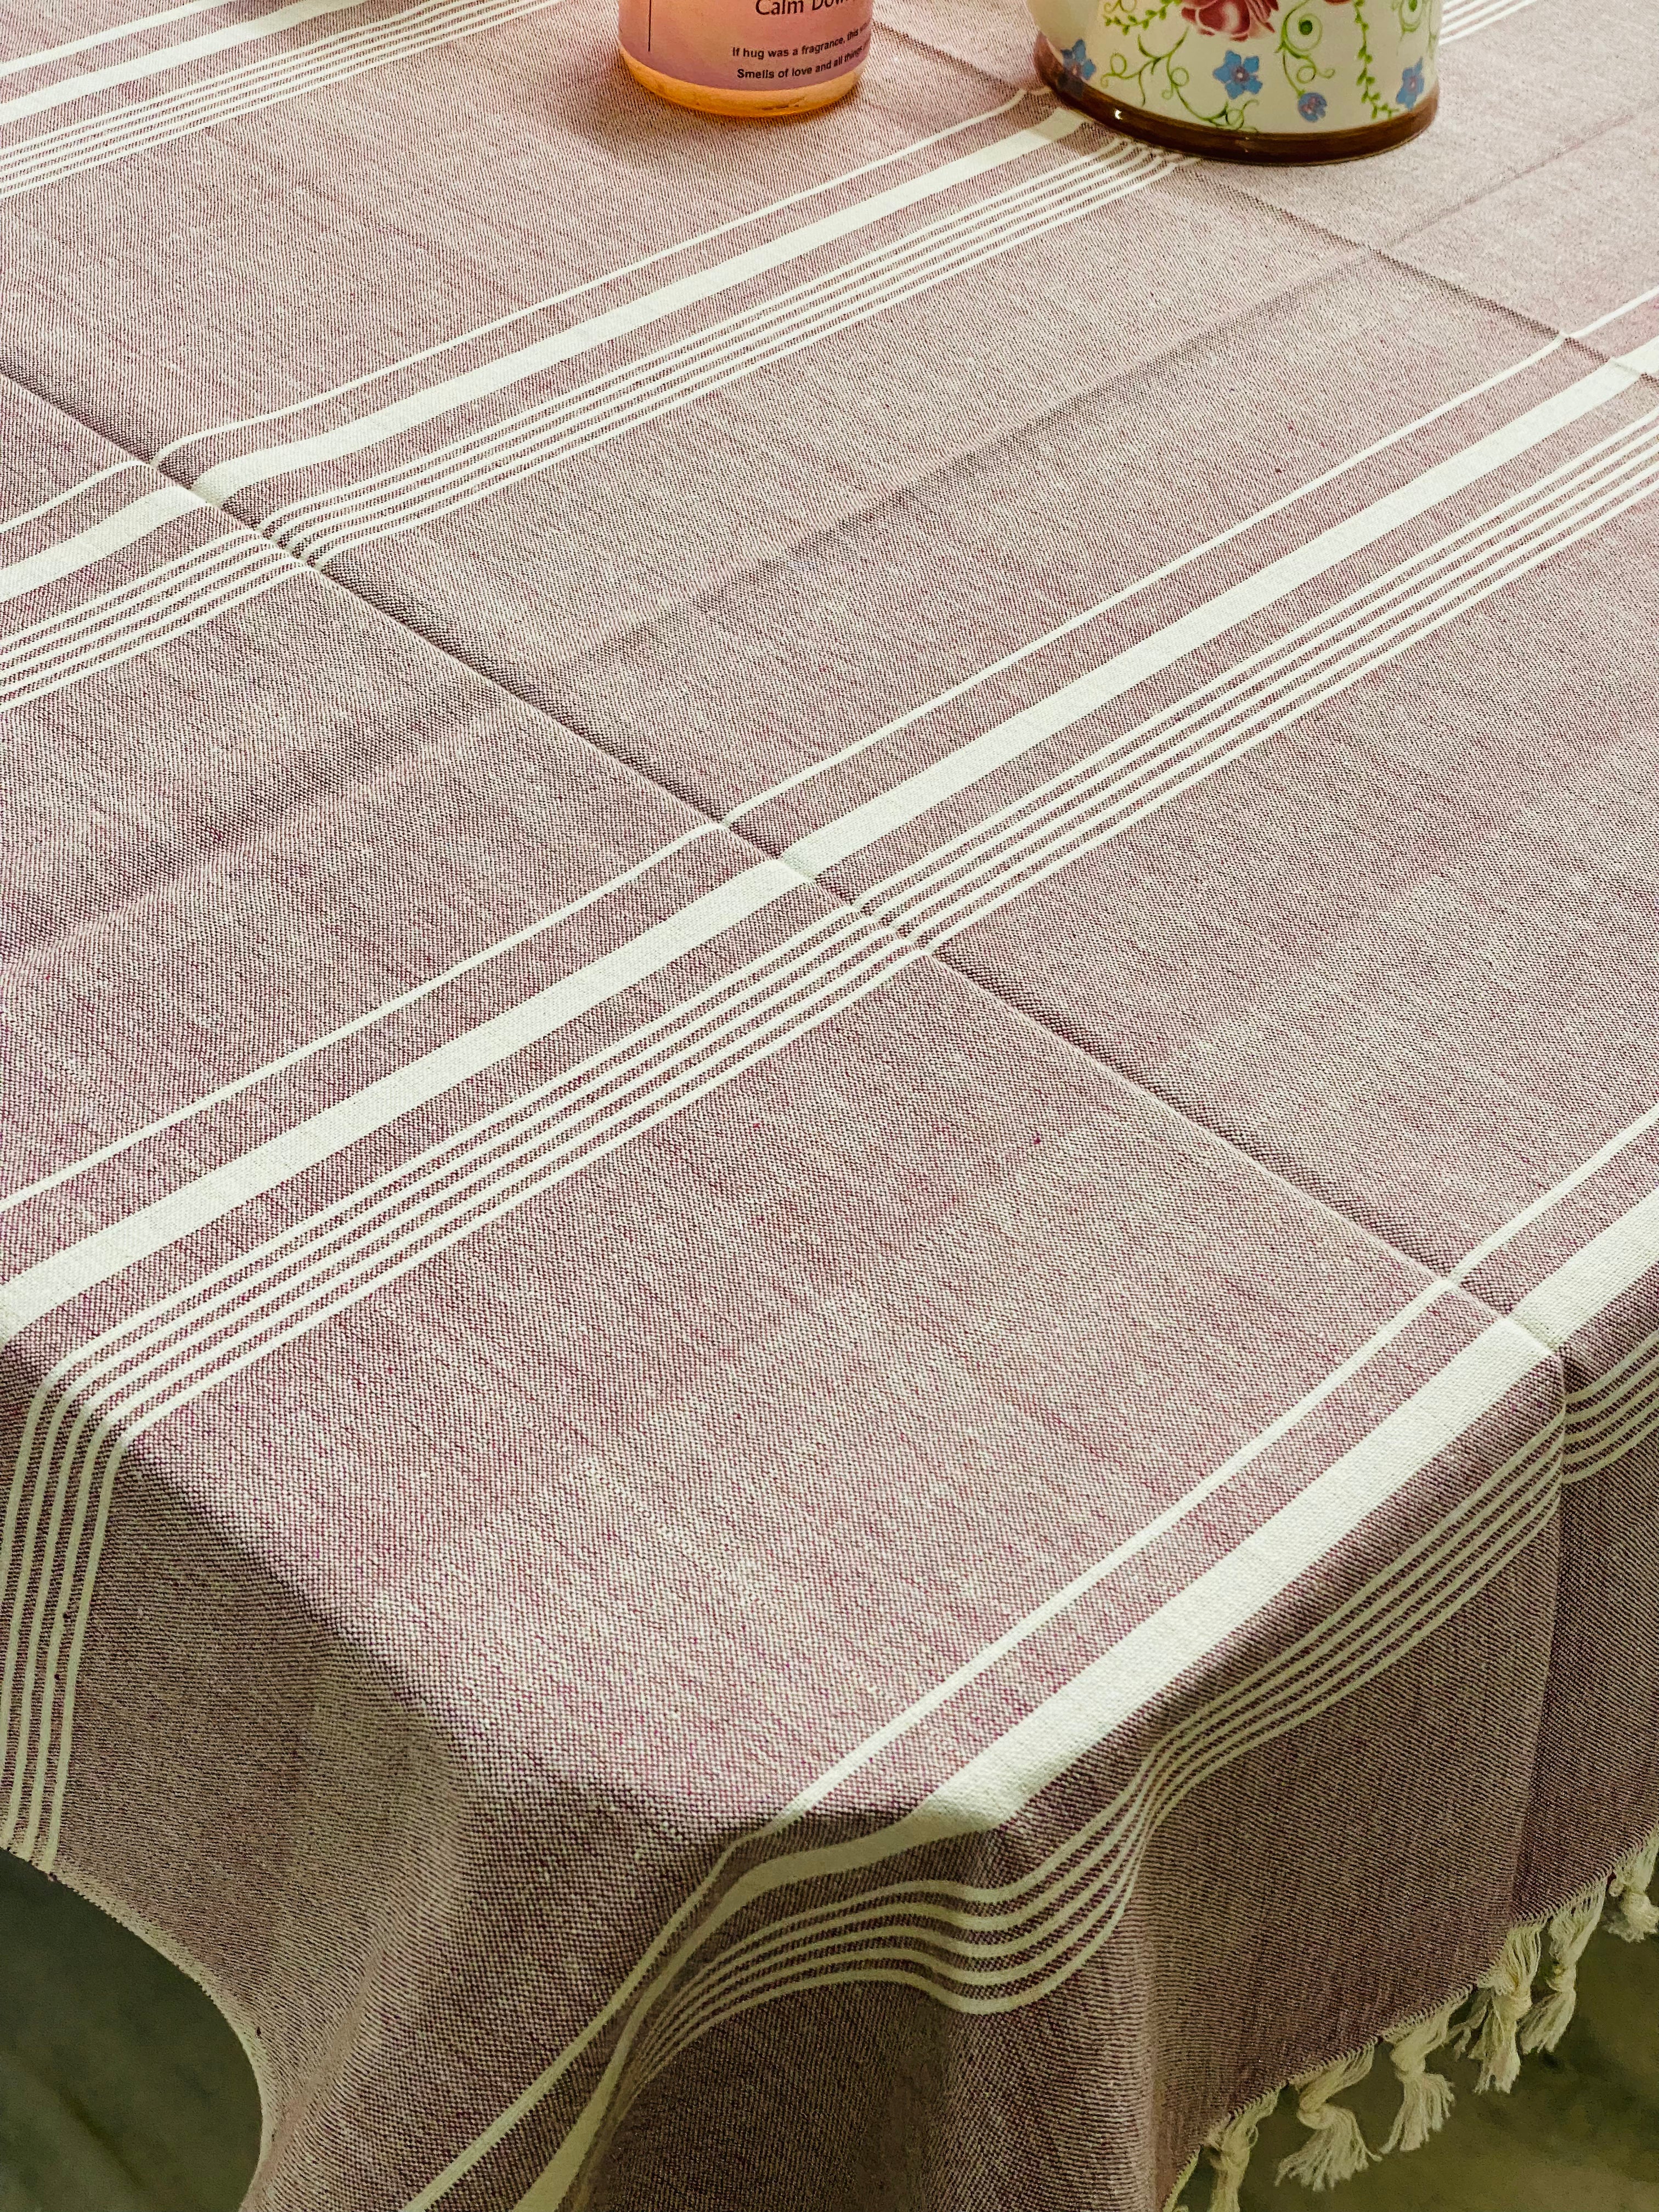 Woven Cotton Table Cloth 6 Seater (90*60 inches)